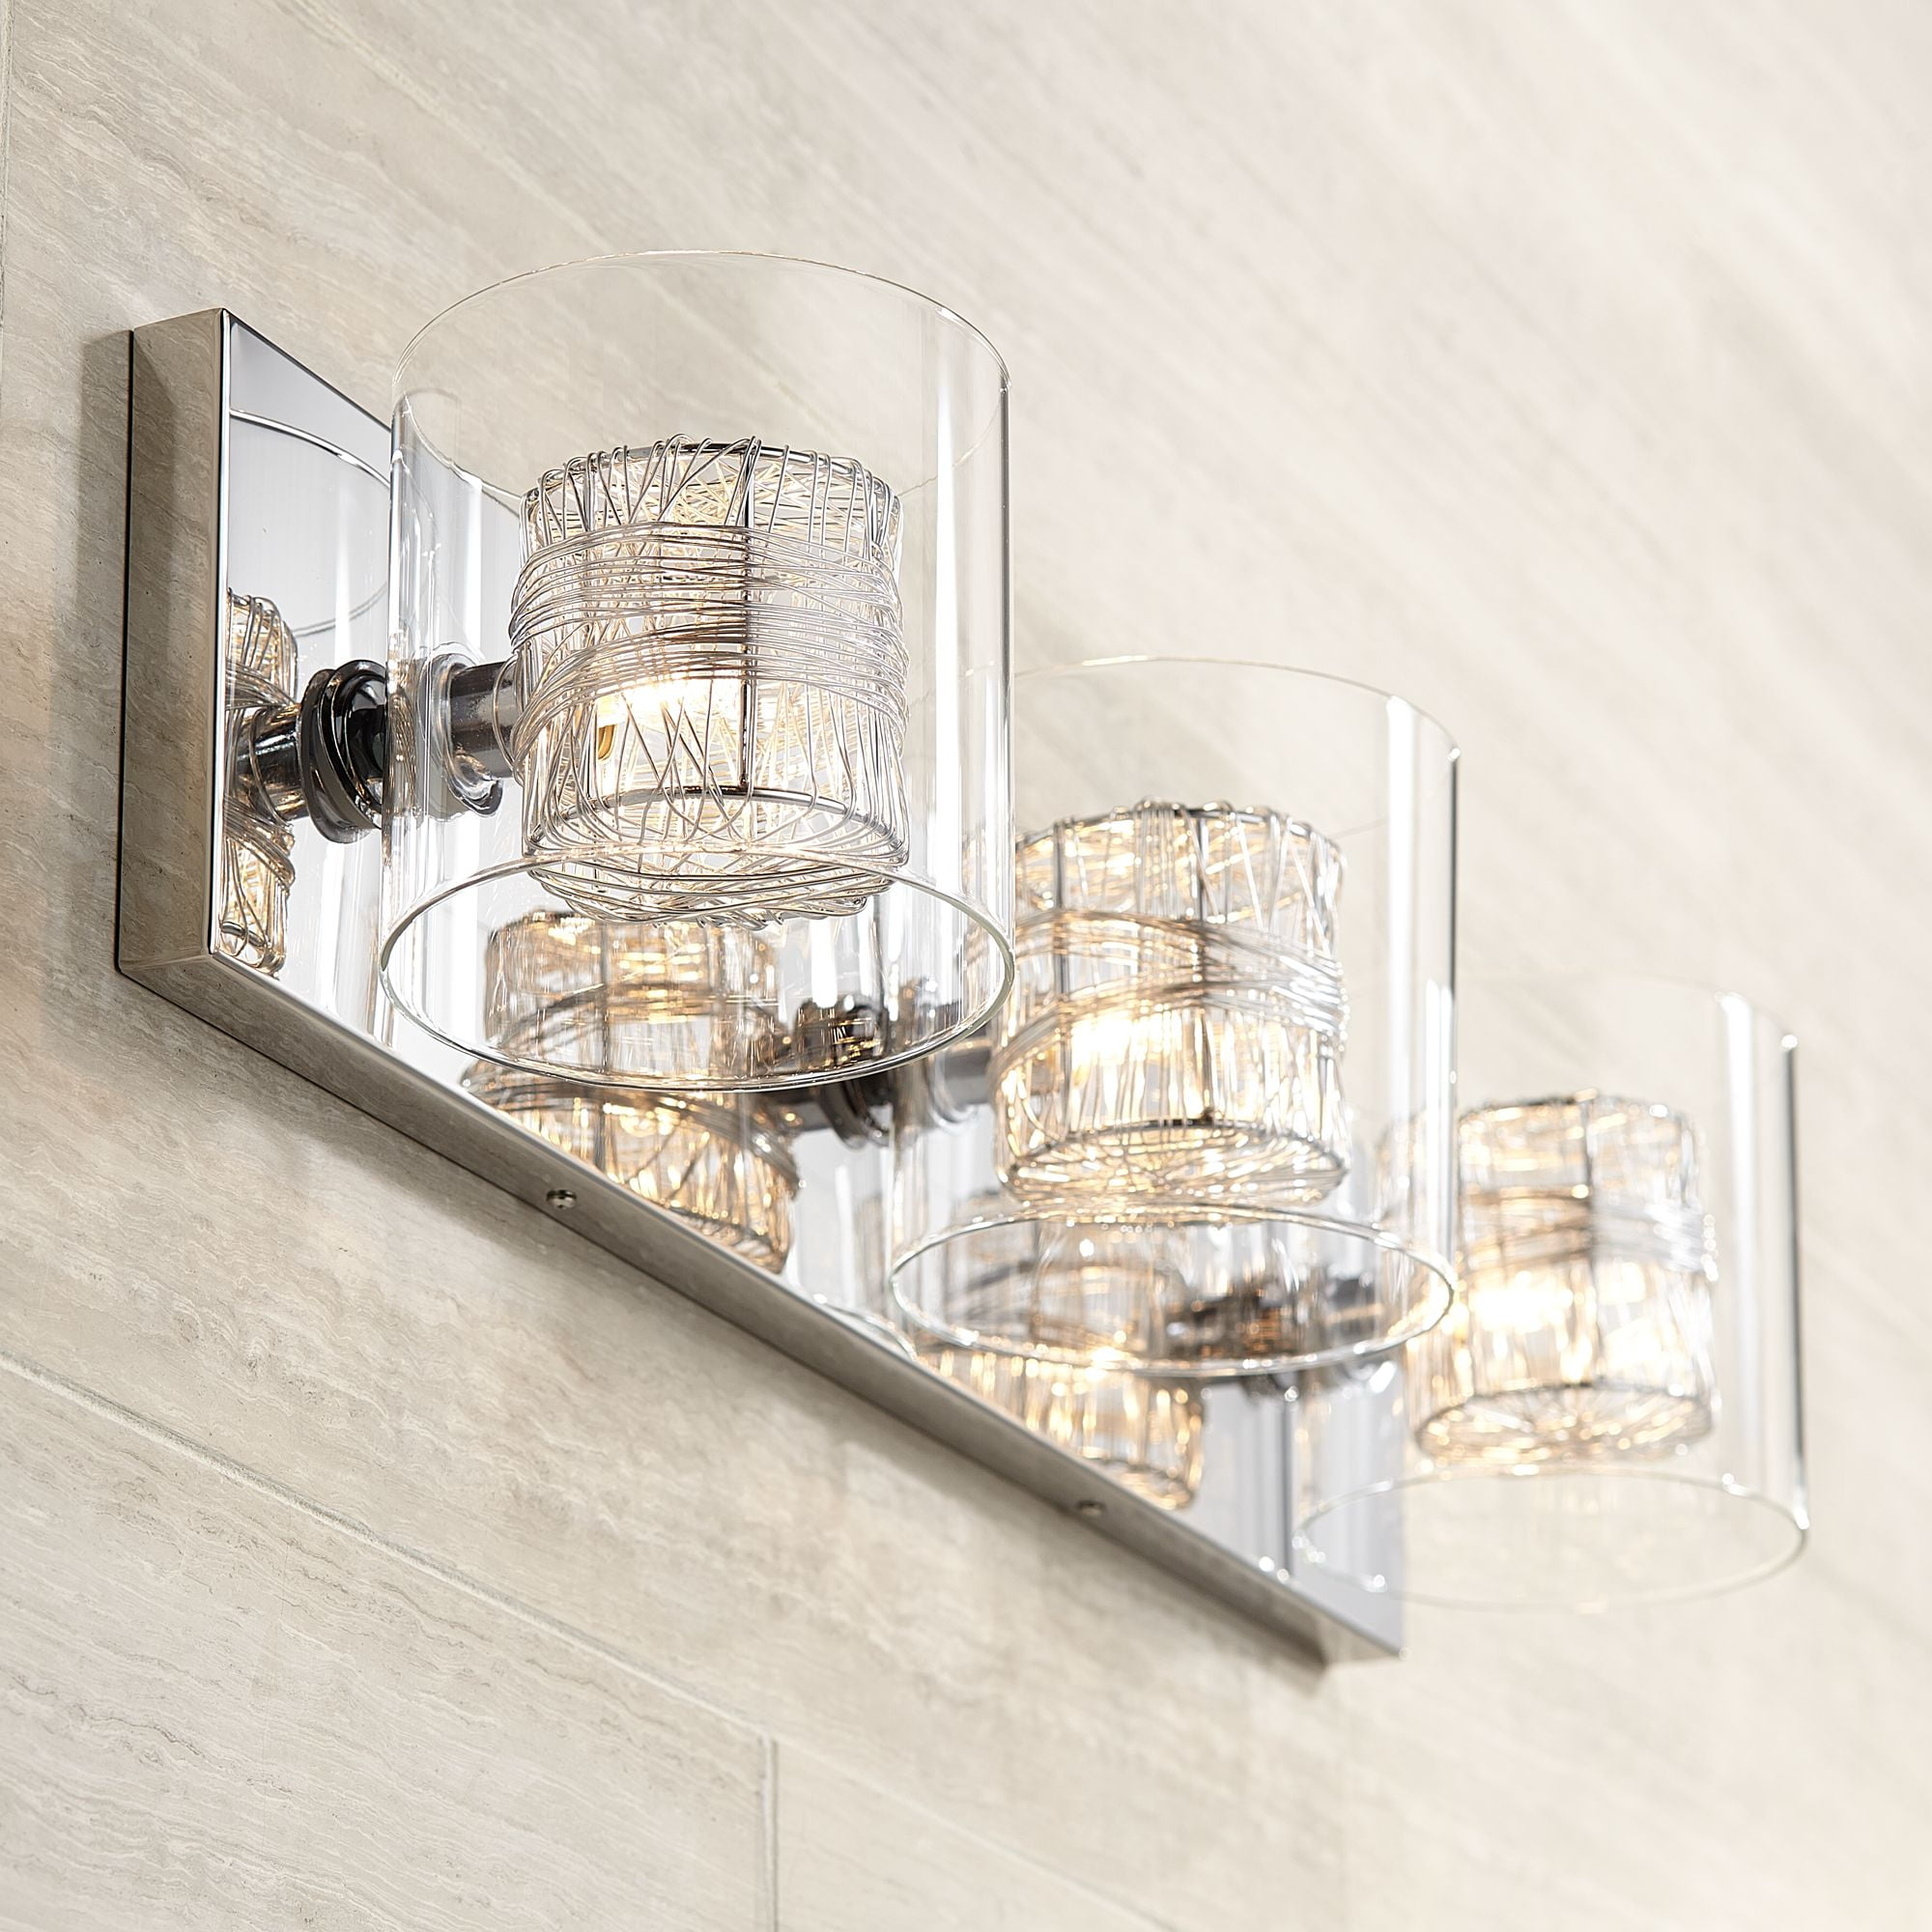 Contemporary Metal Wall Light Fixtures for Dressing Table Mirror Cabinets Vanity Table MELUCEE Modern Vanity Lights for Bathroom 5 Lights Chrome Finish with Clear Glass Shade 